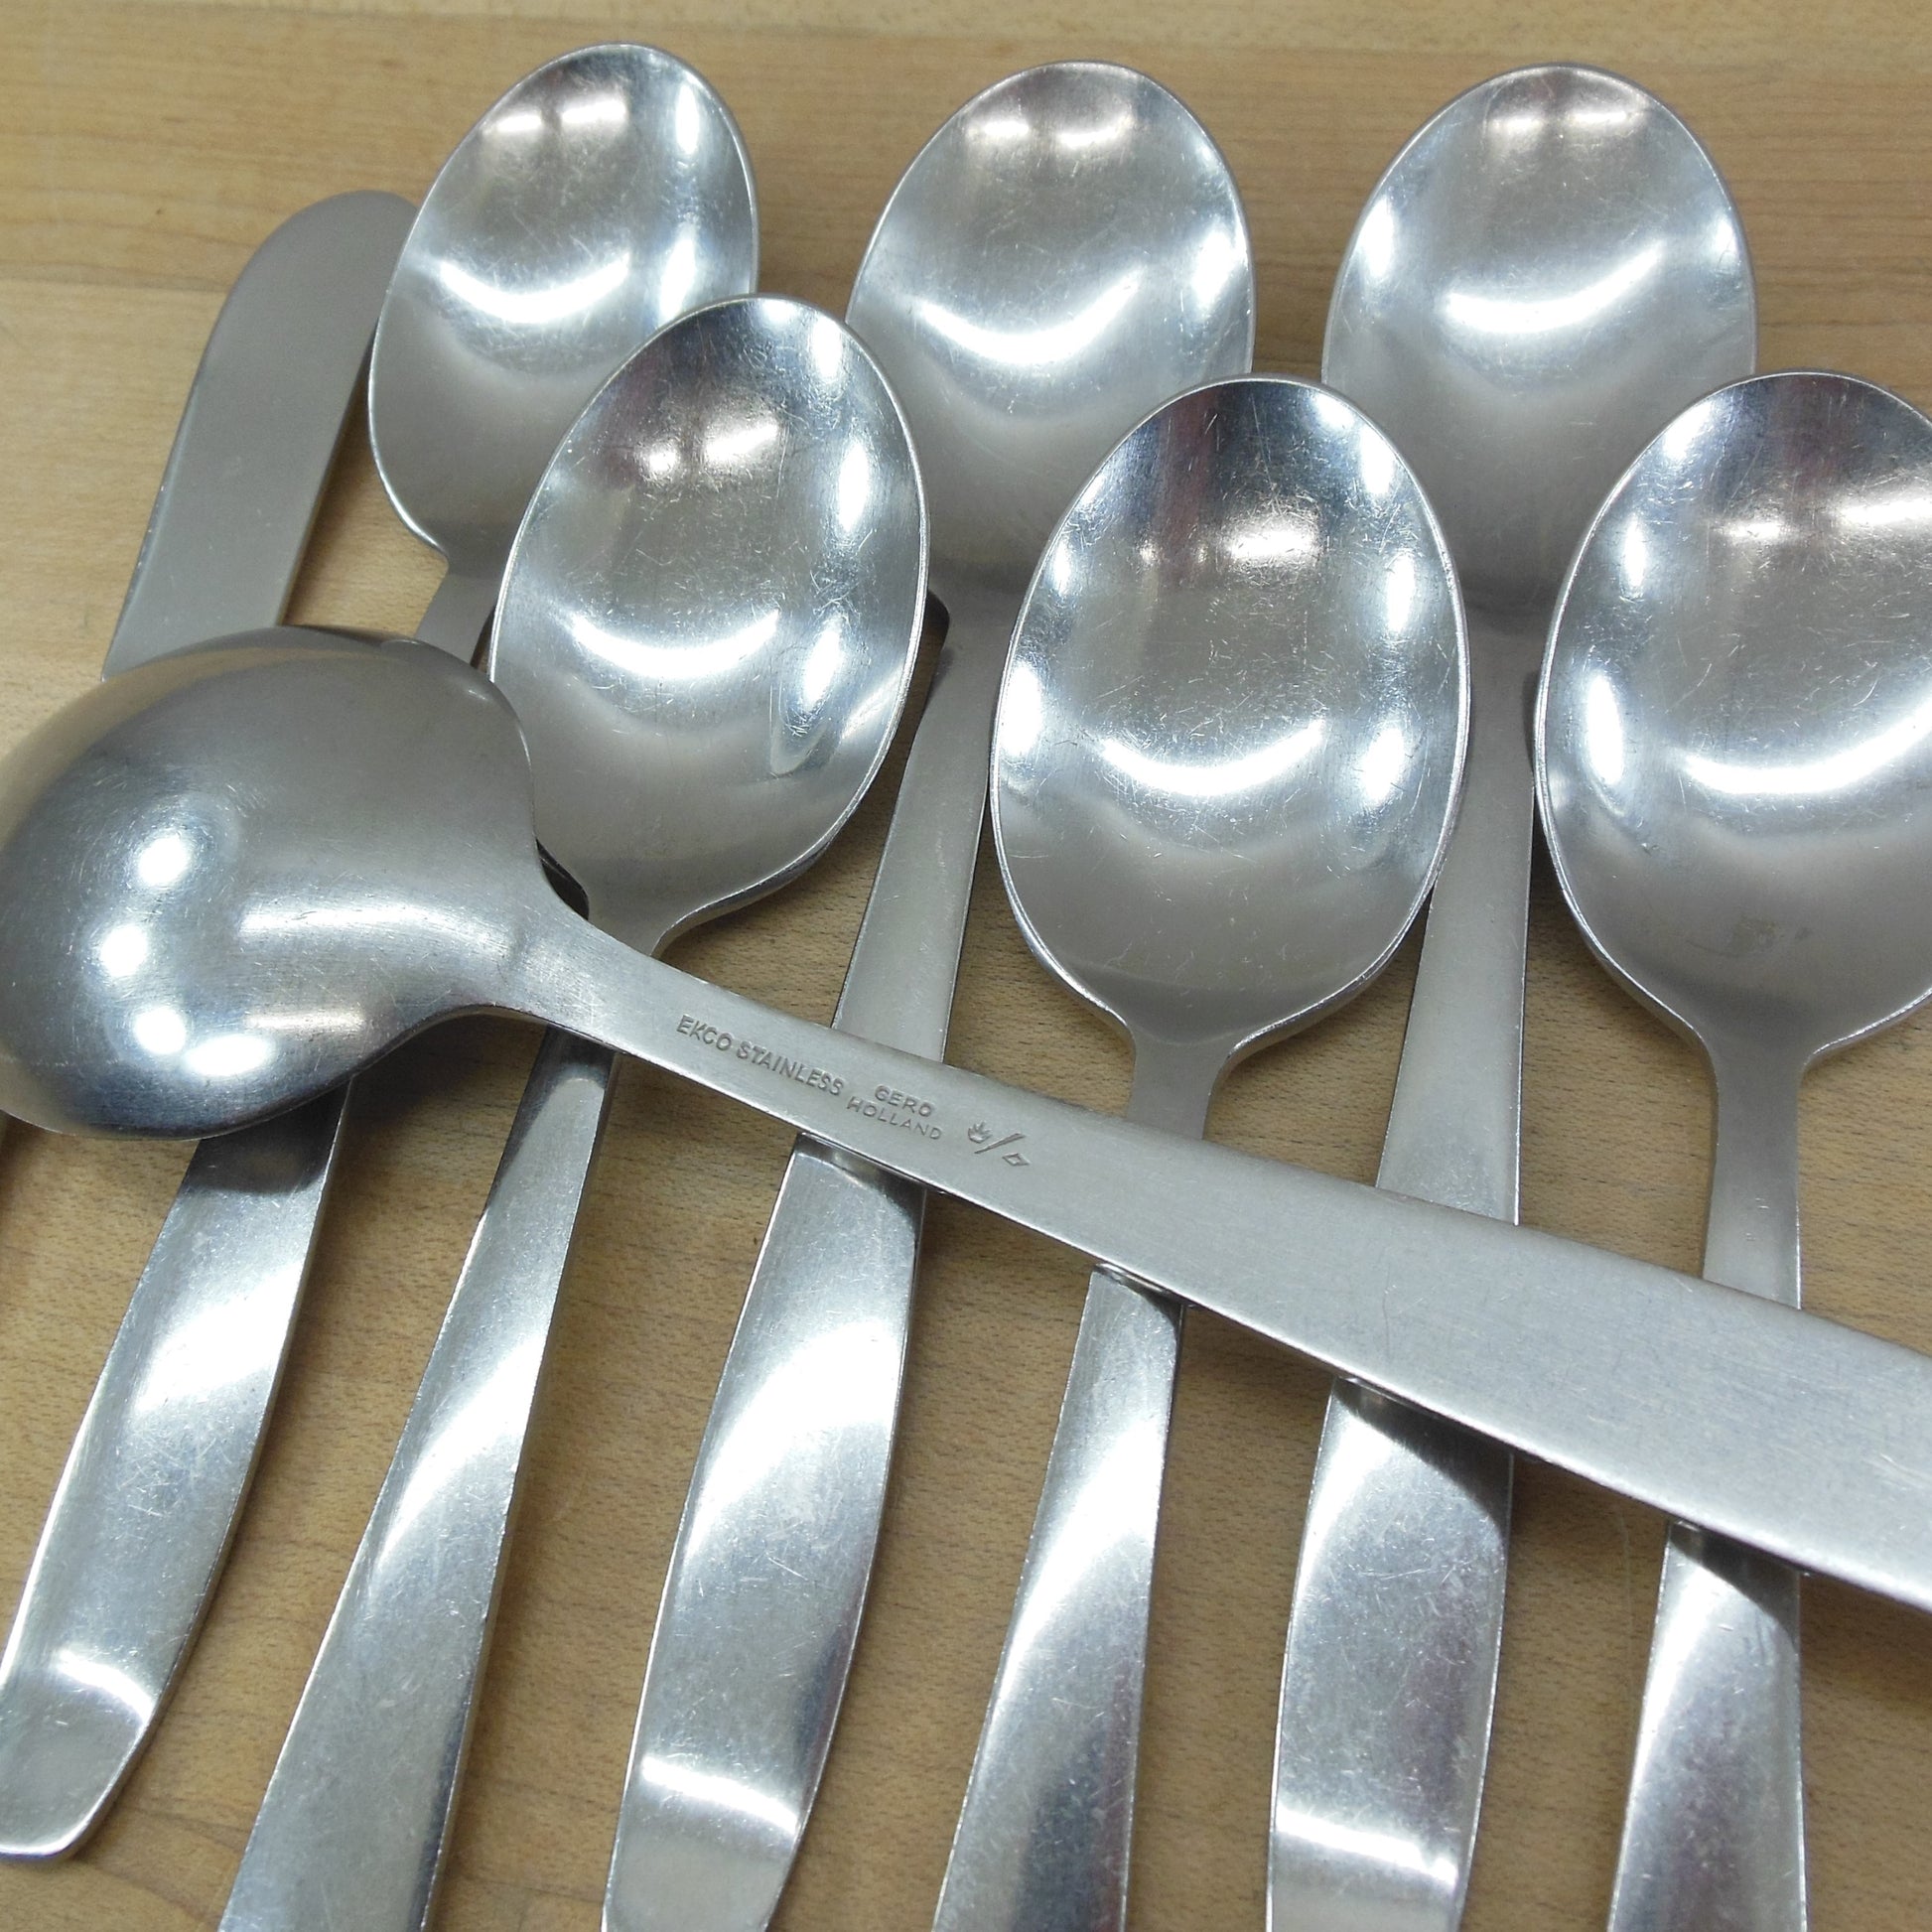 Ekco Gero Holland Princess Irene Stainless Teaspoons Place Spoon Master Butter used